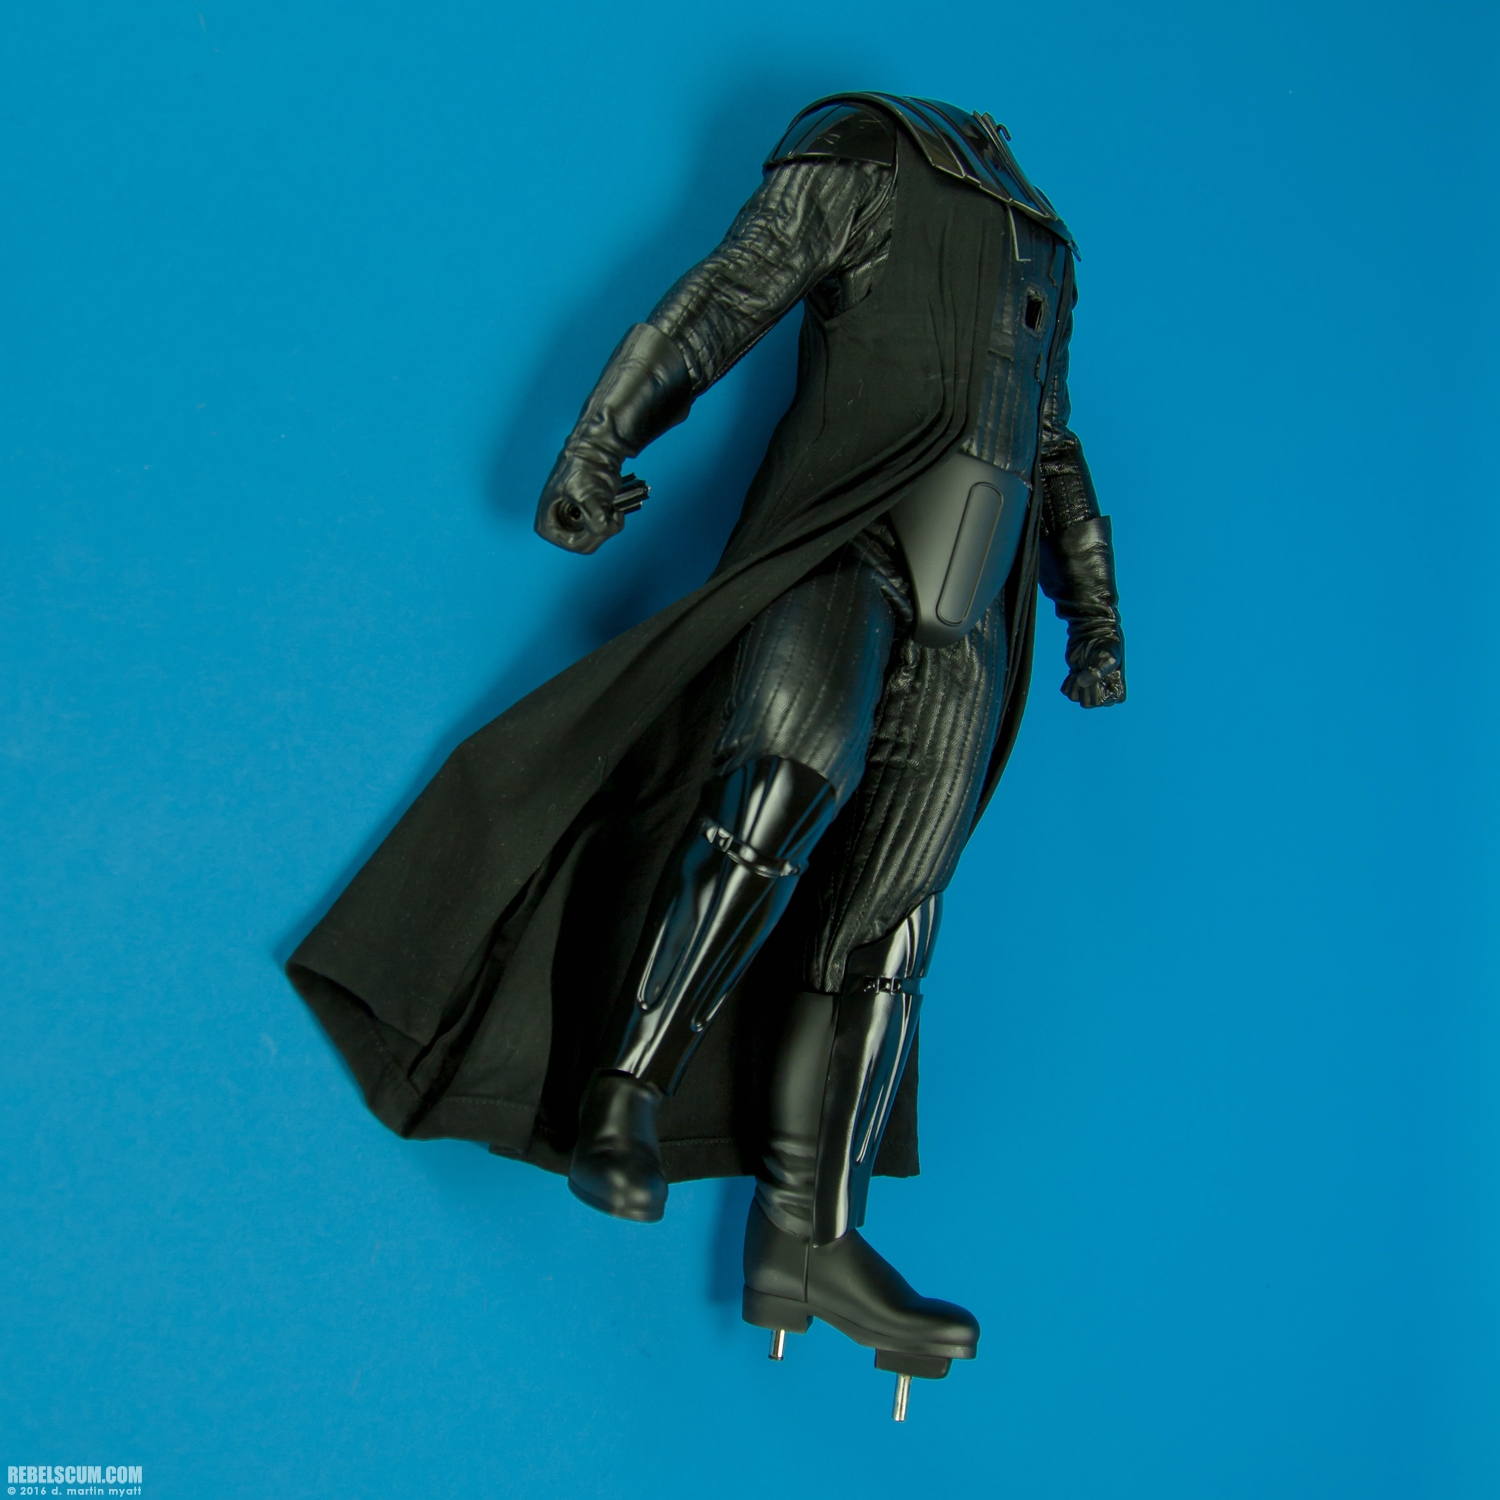 Darth-Vader-Lord-of-the-Sith-Premium-Format-Figure-Sideshow-009.jpg